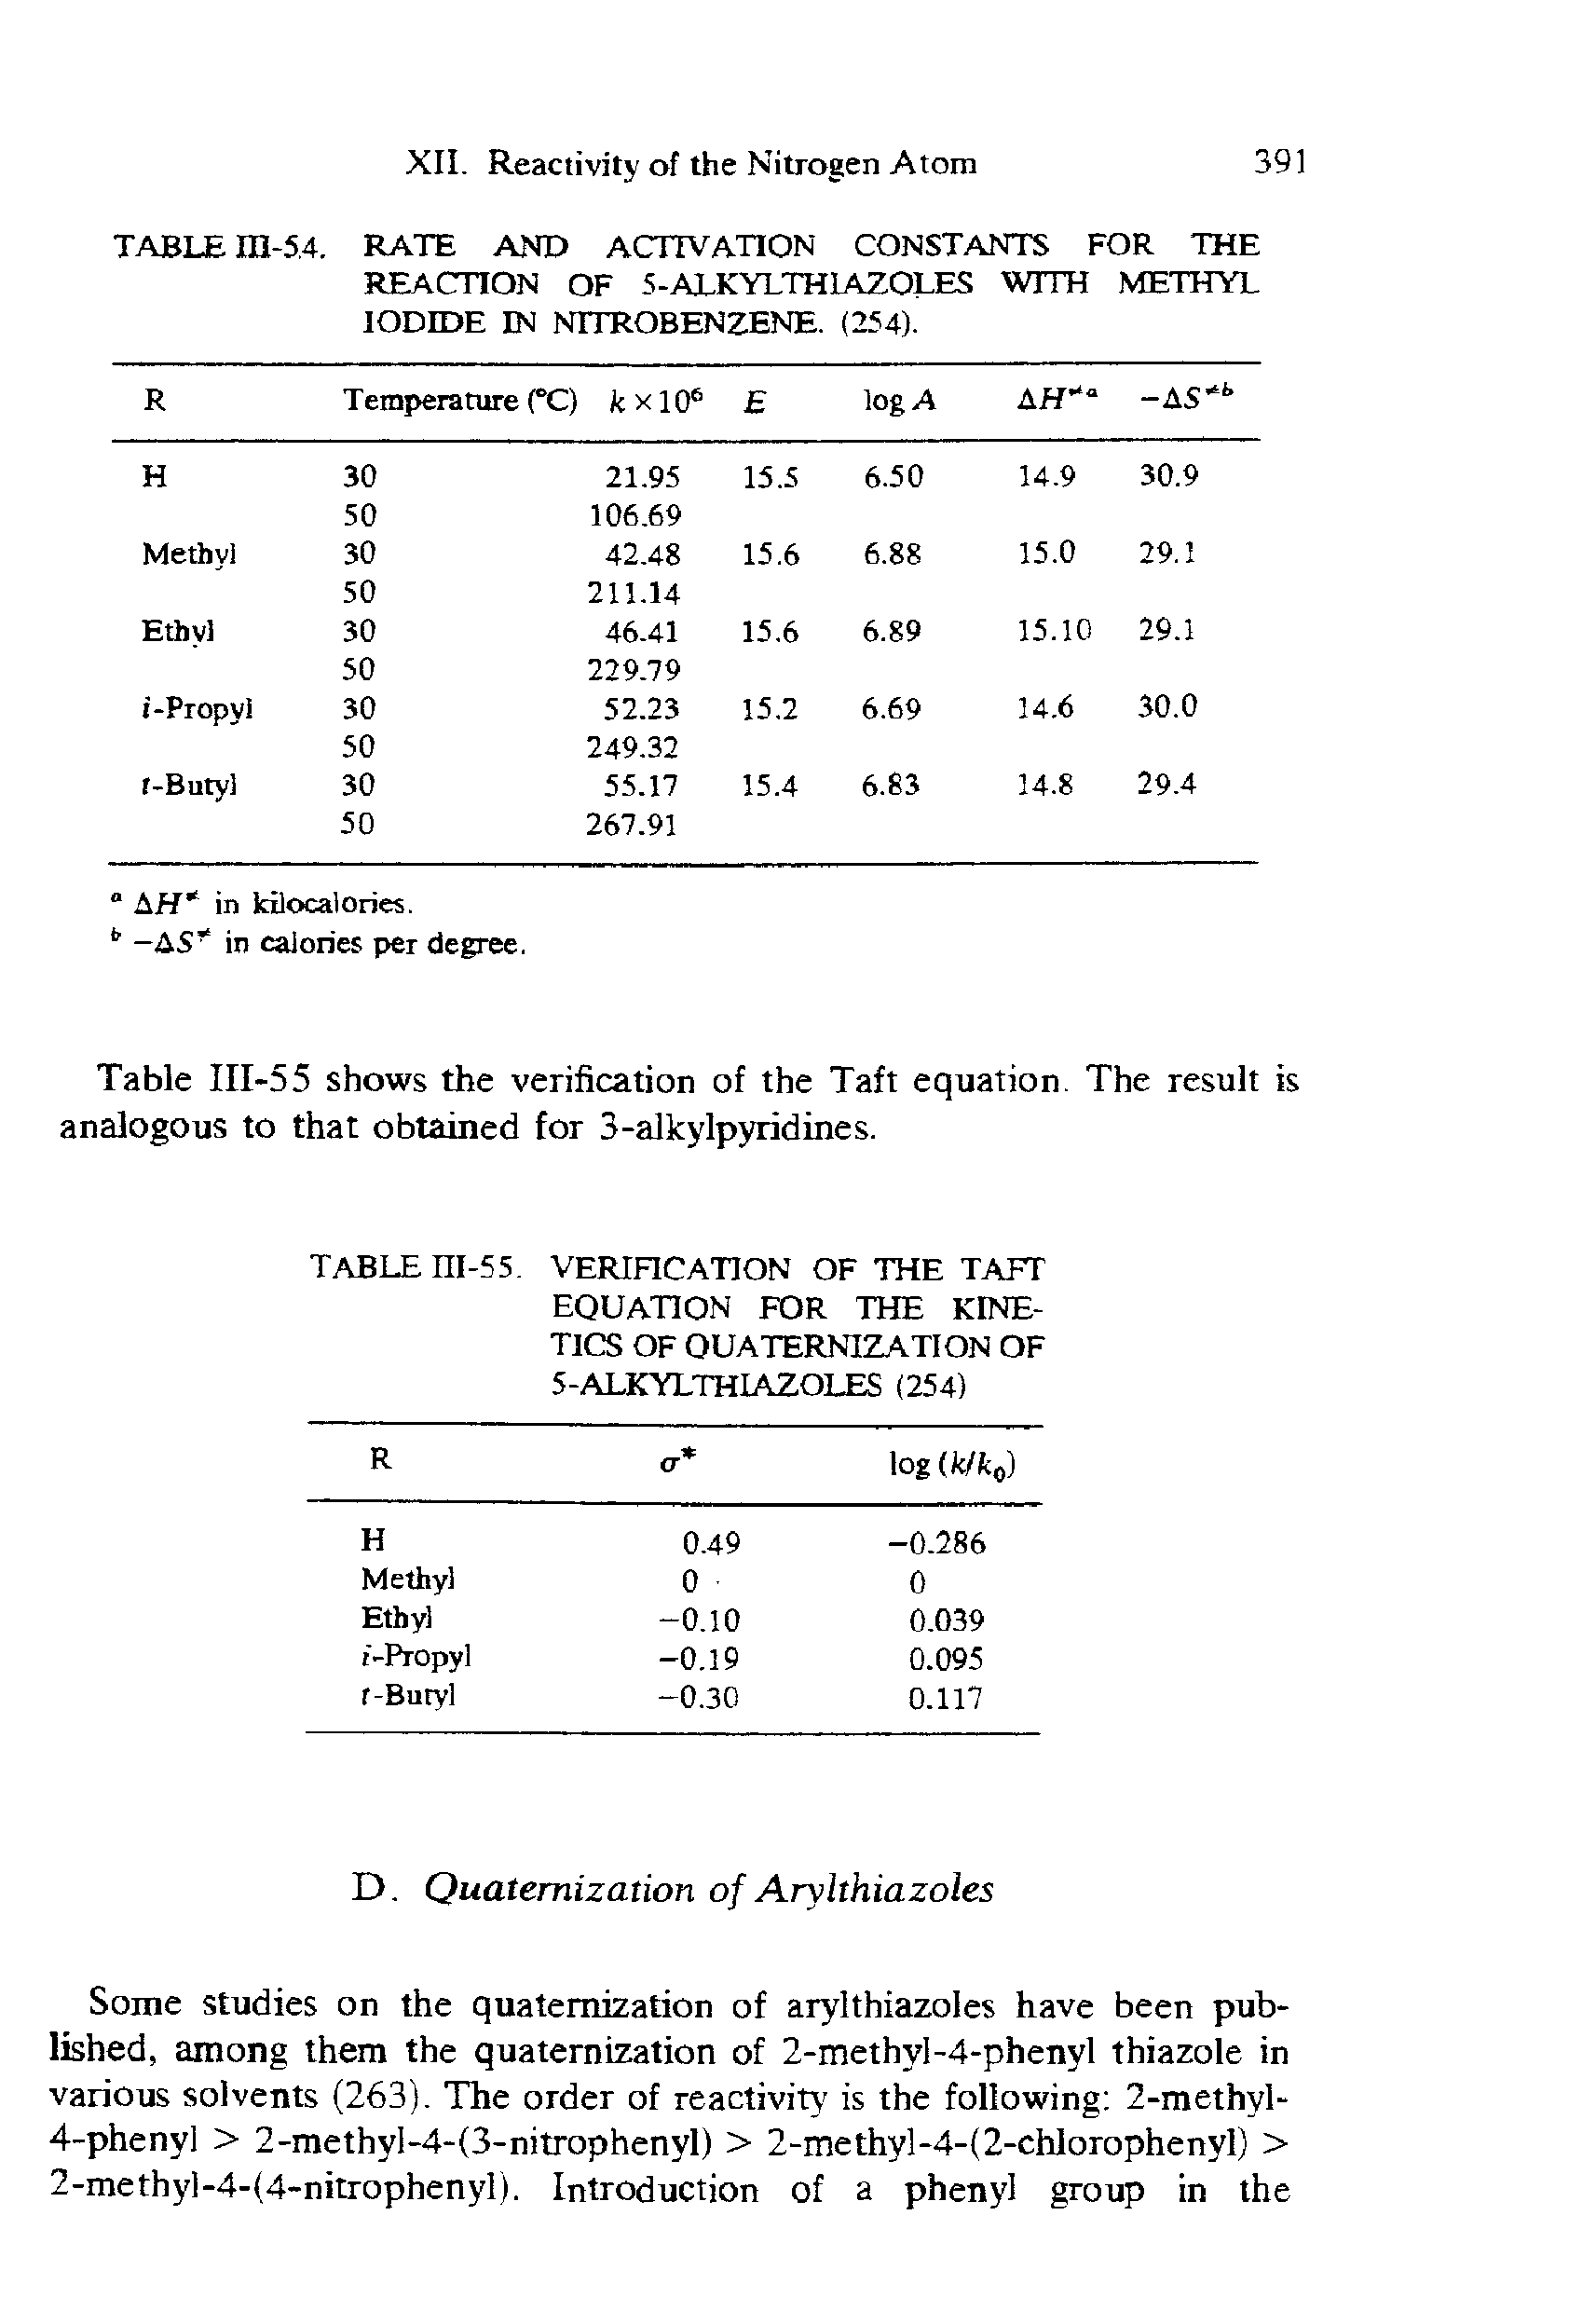 Table III-55 shows the verification of the Taft equation. The result is analogous to that obtained for 3-alkylpyridines.